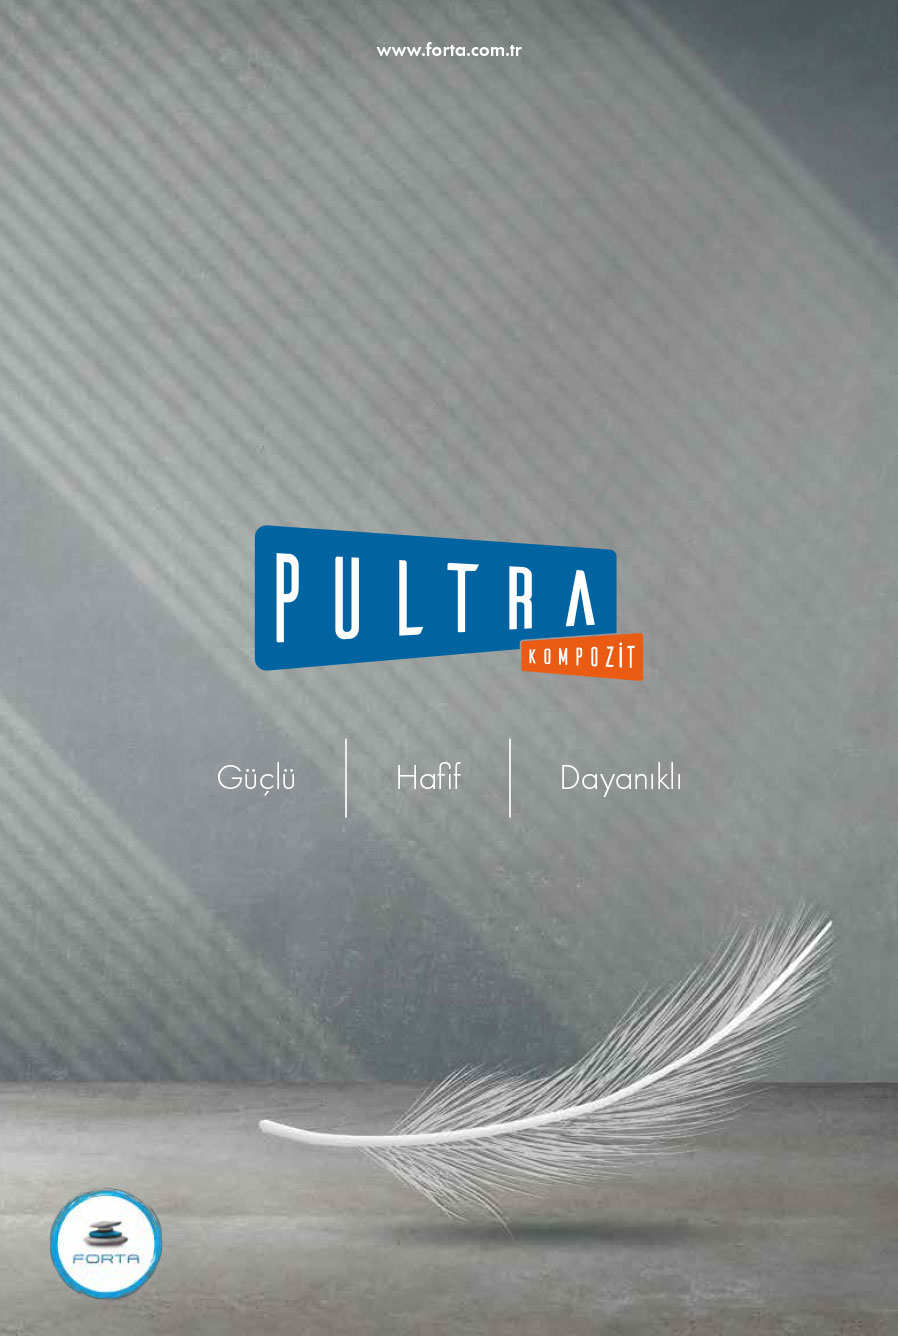 Pultra